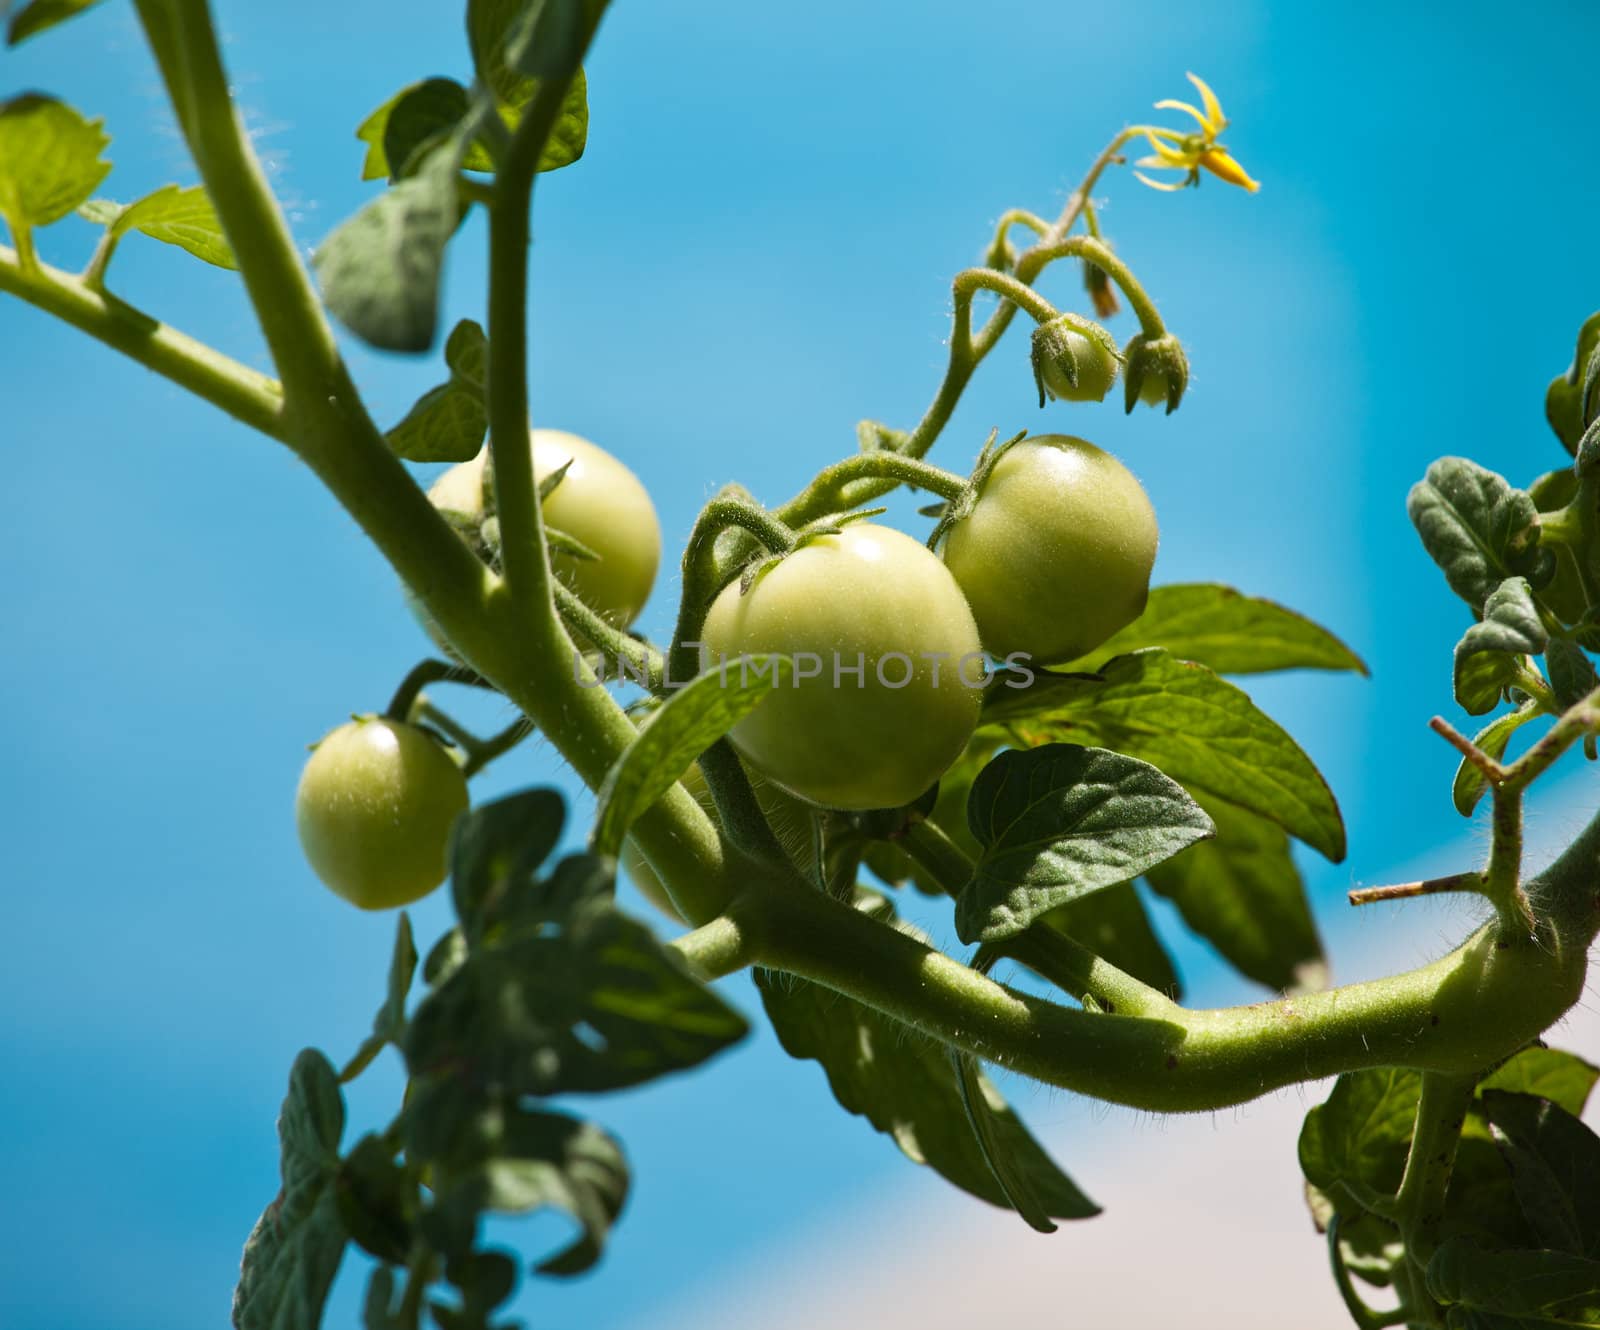 Growing green tomatoes outdoors against a bright blue sky background